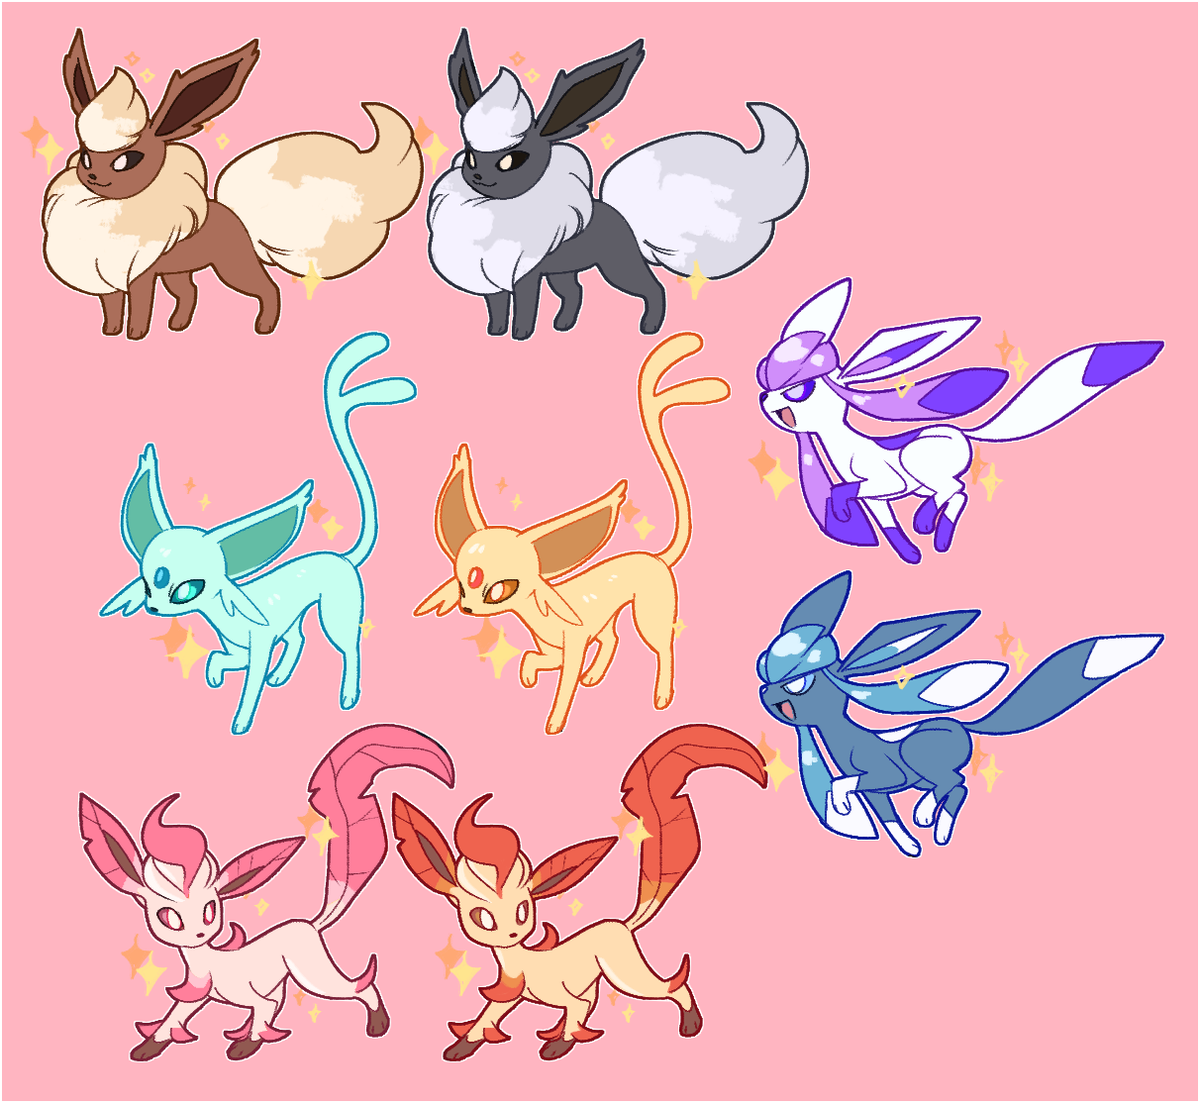 Redesigned some shiny Eevees that deserved better color schemes. 